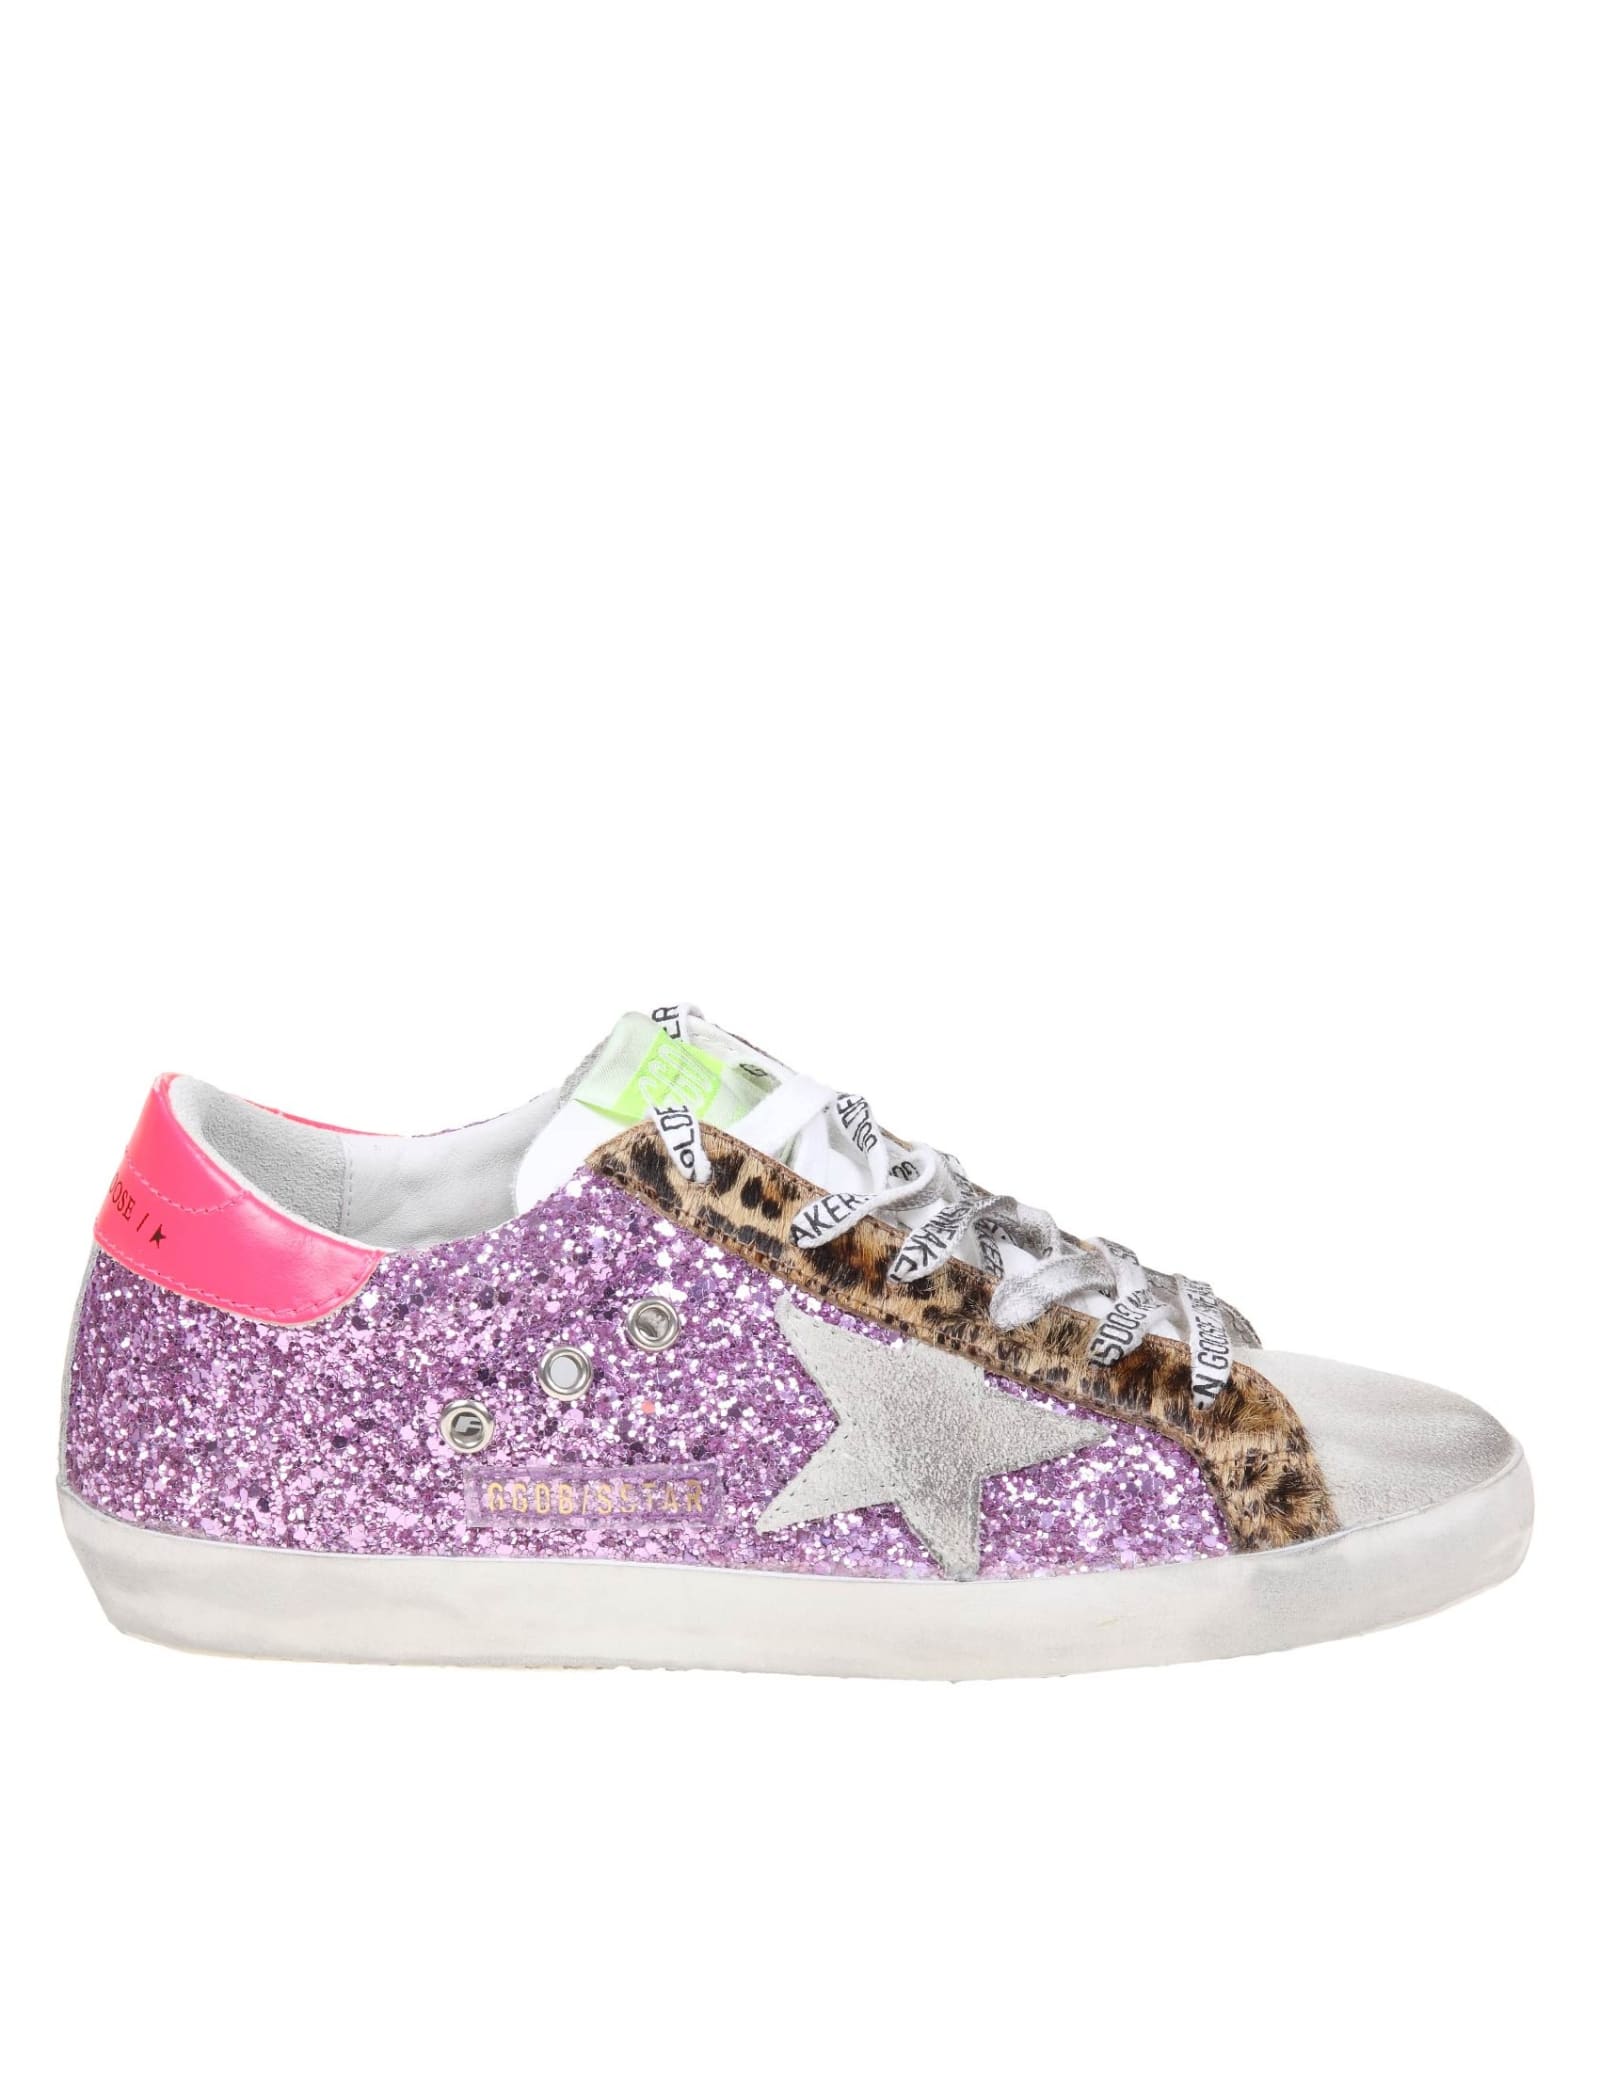 Buy Golden Goose Sneakerssuper Star Glitter Pink online, shop Golden Goose shoes with free shipping